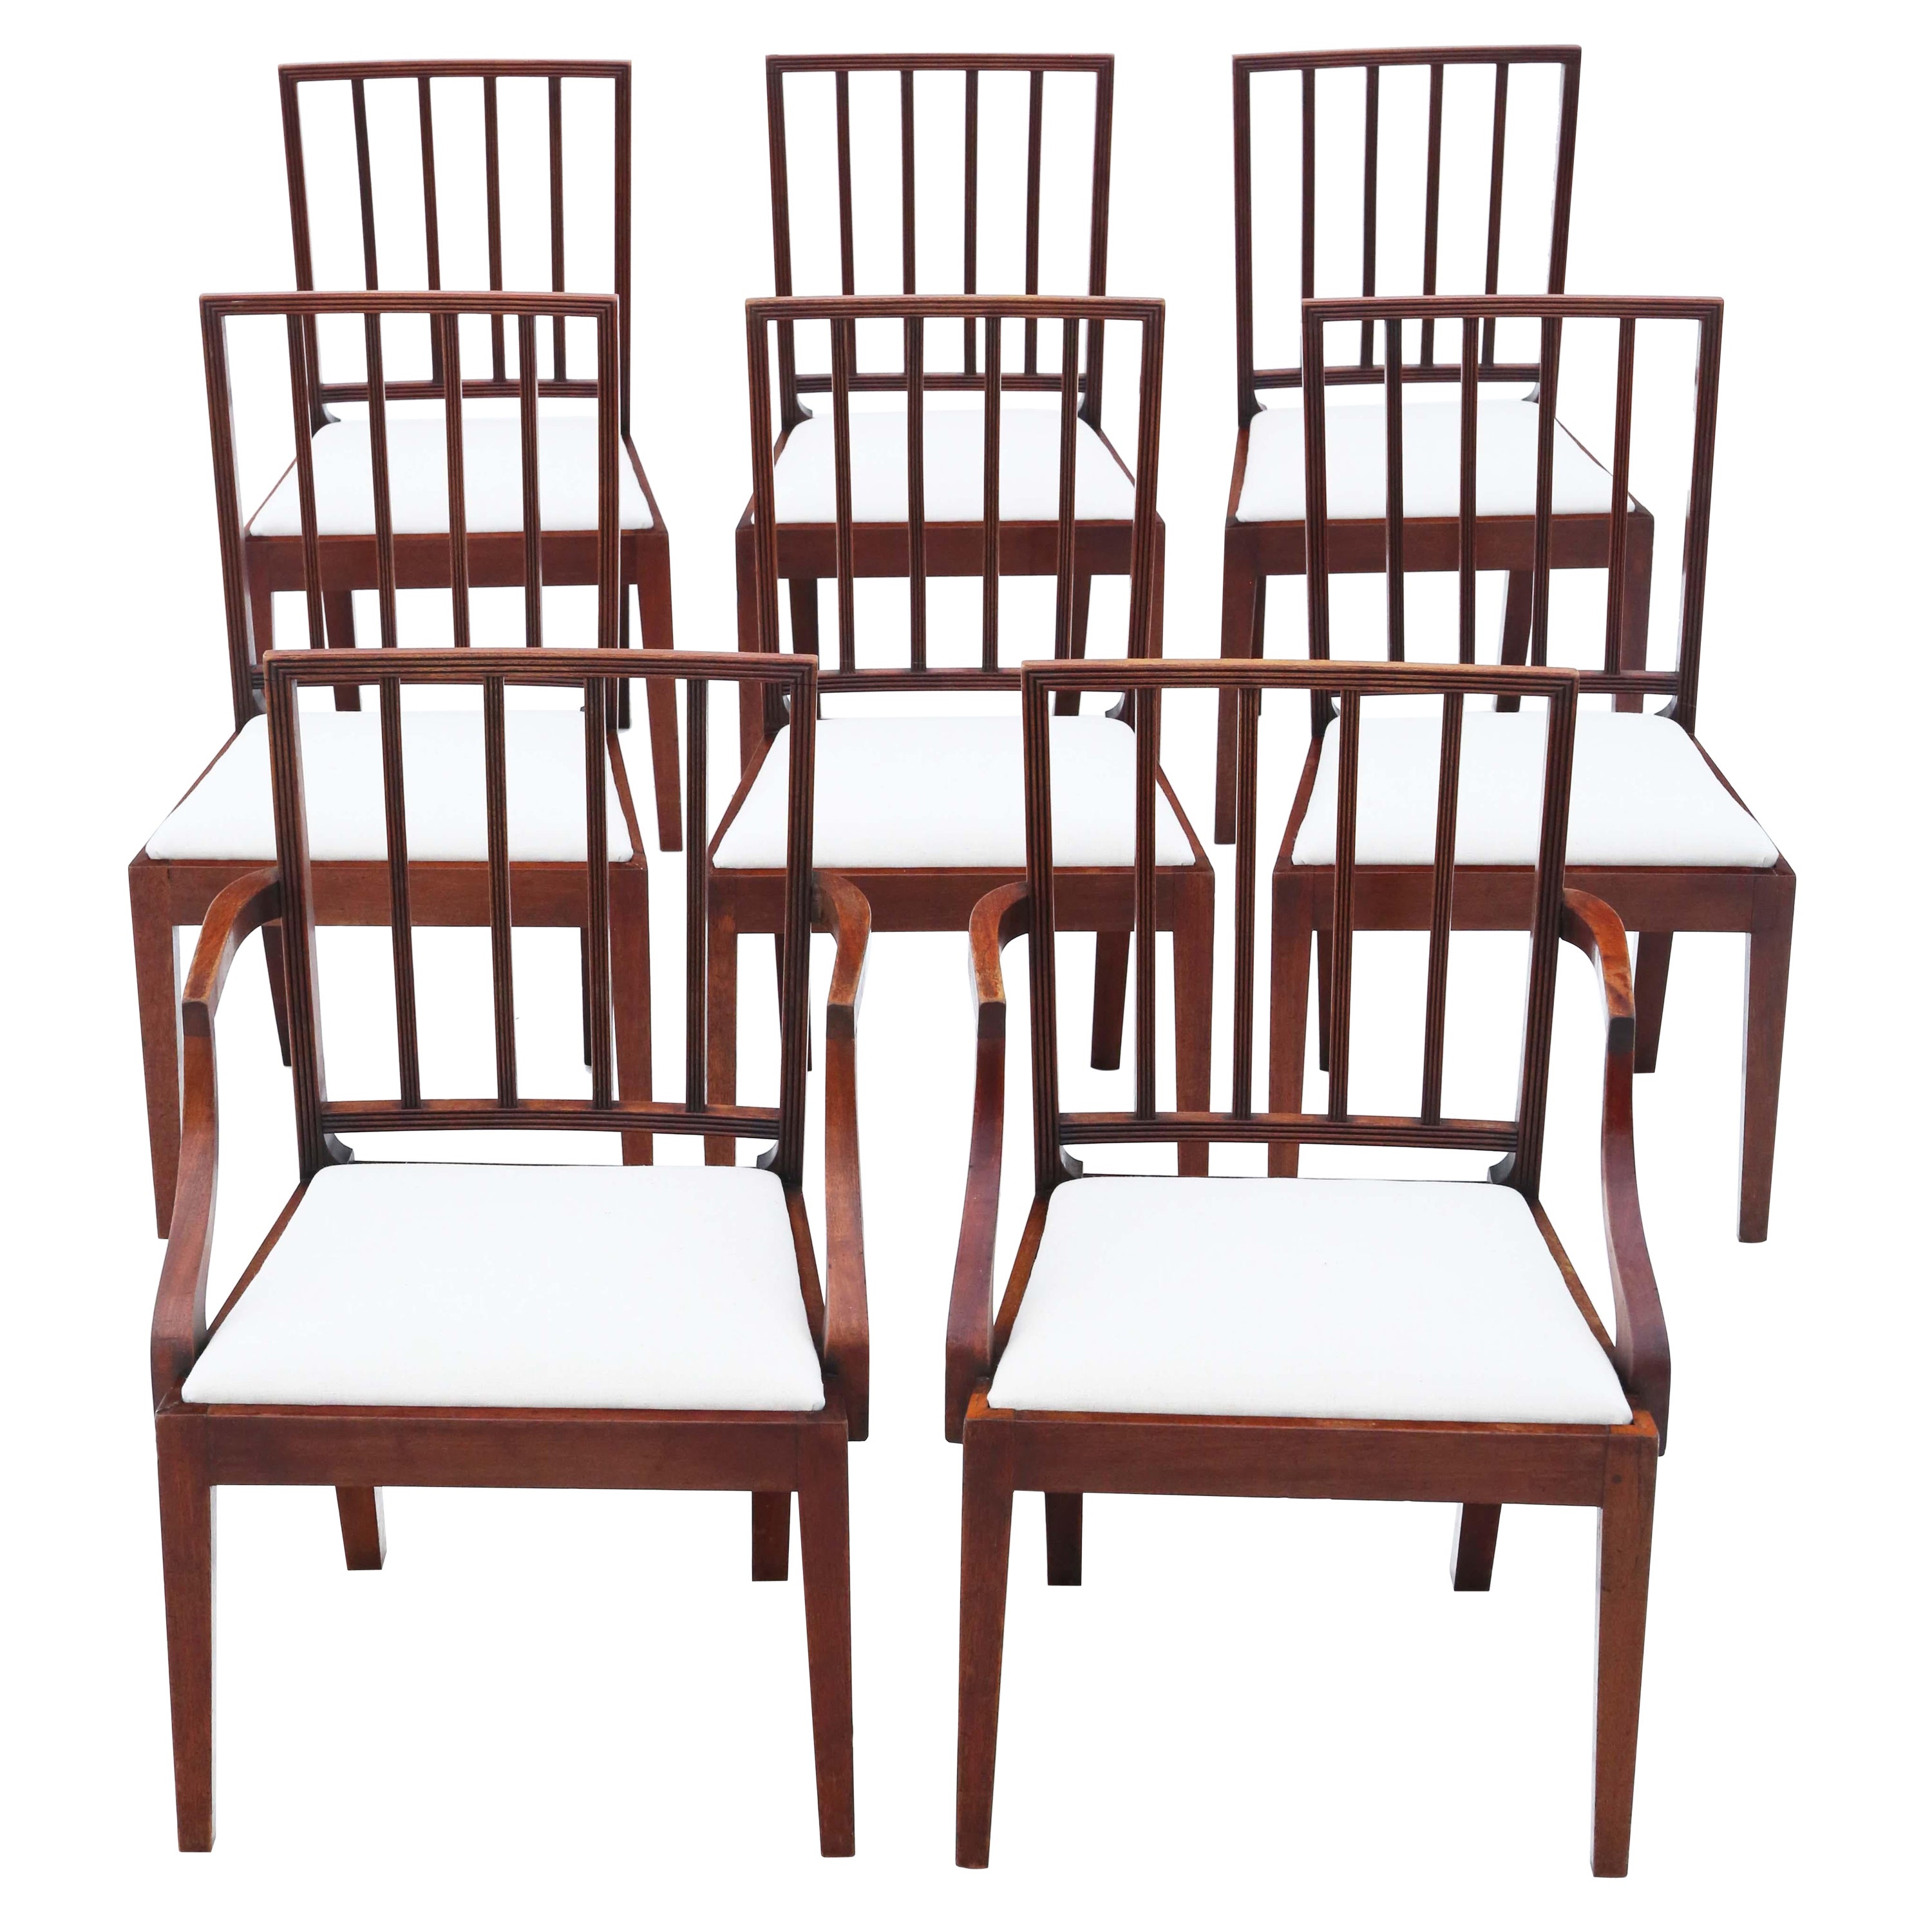 Mahogany Dining Chairs: Set of 8 (6+2), Antique Quality, C1820 For Sale